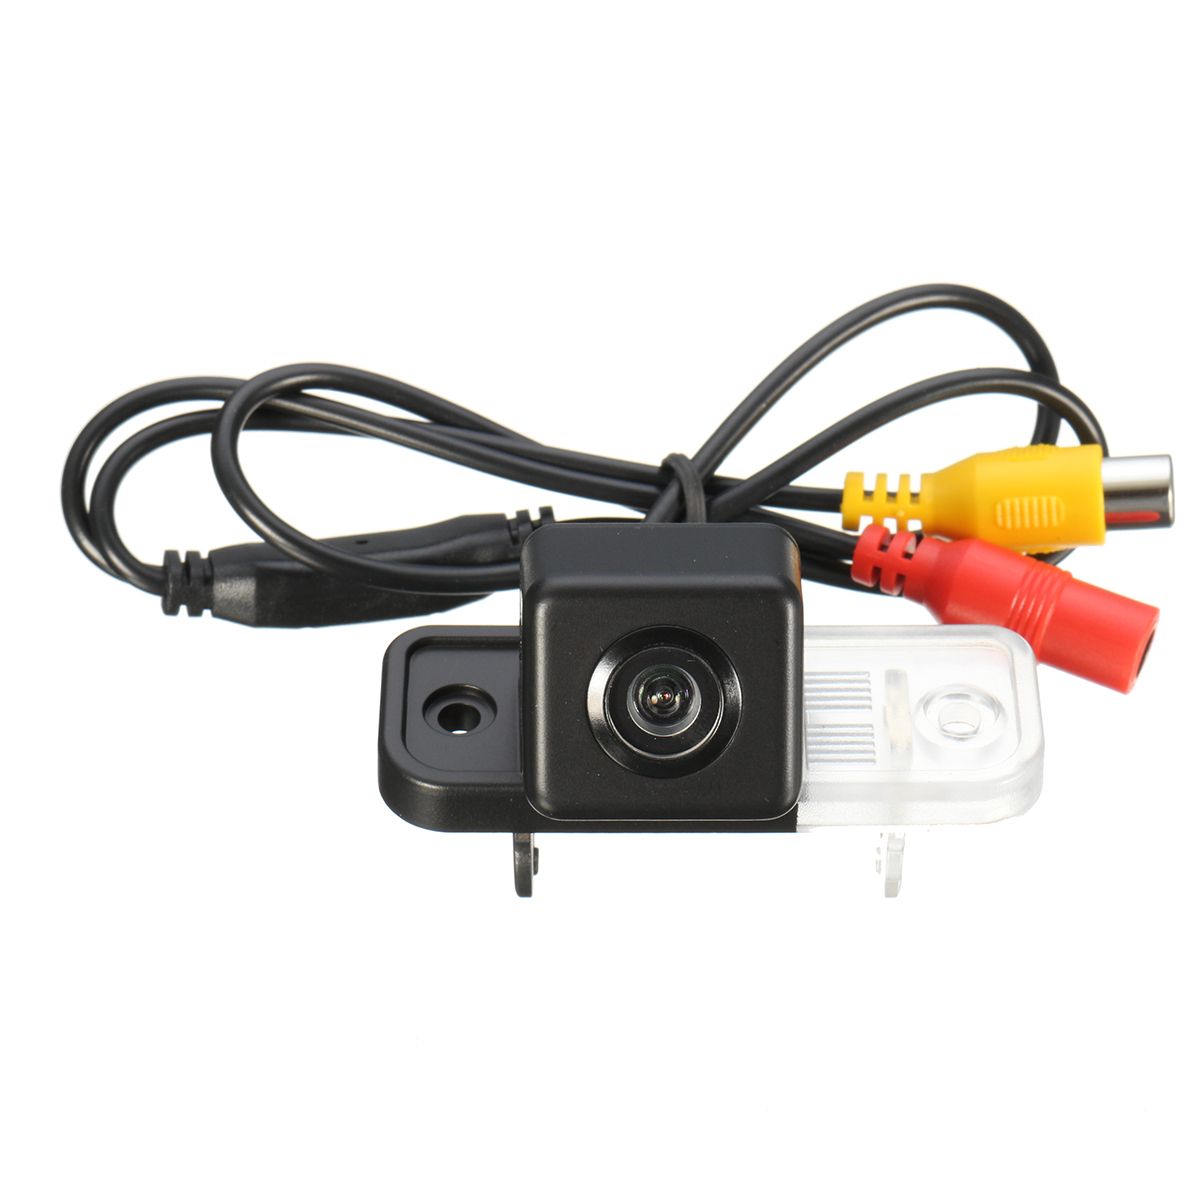 CCD-Car-Rear-View-Camera-For-Mercedes-C-Class-W203-W211-CLS-W219-1148135